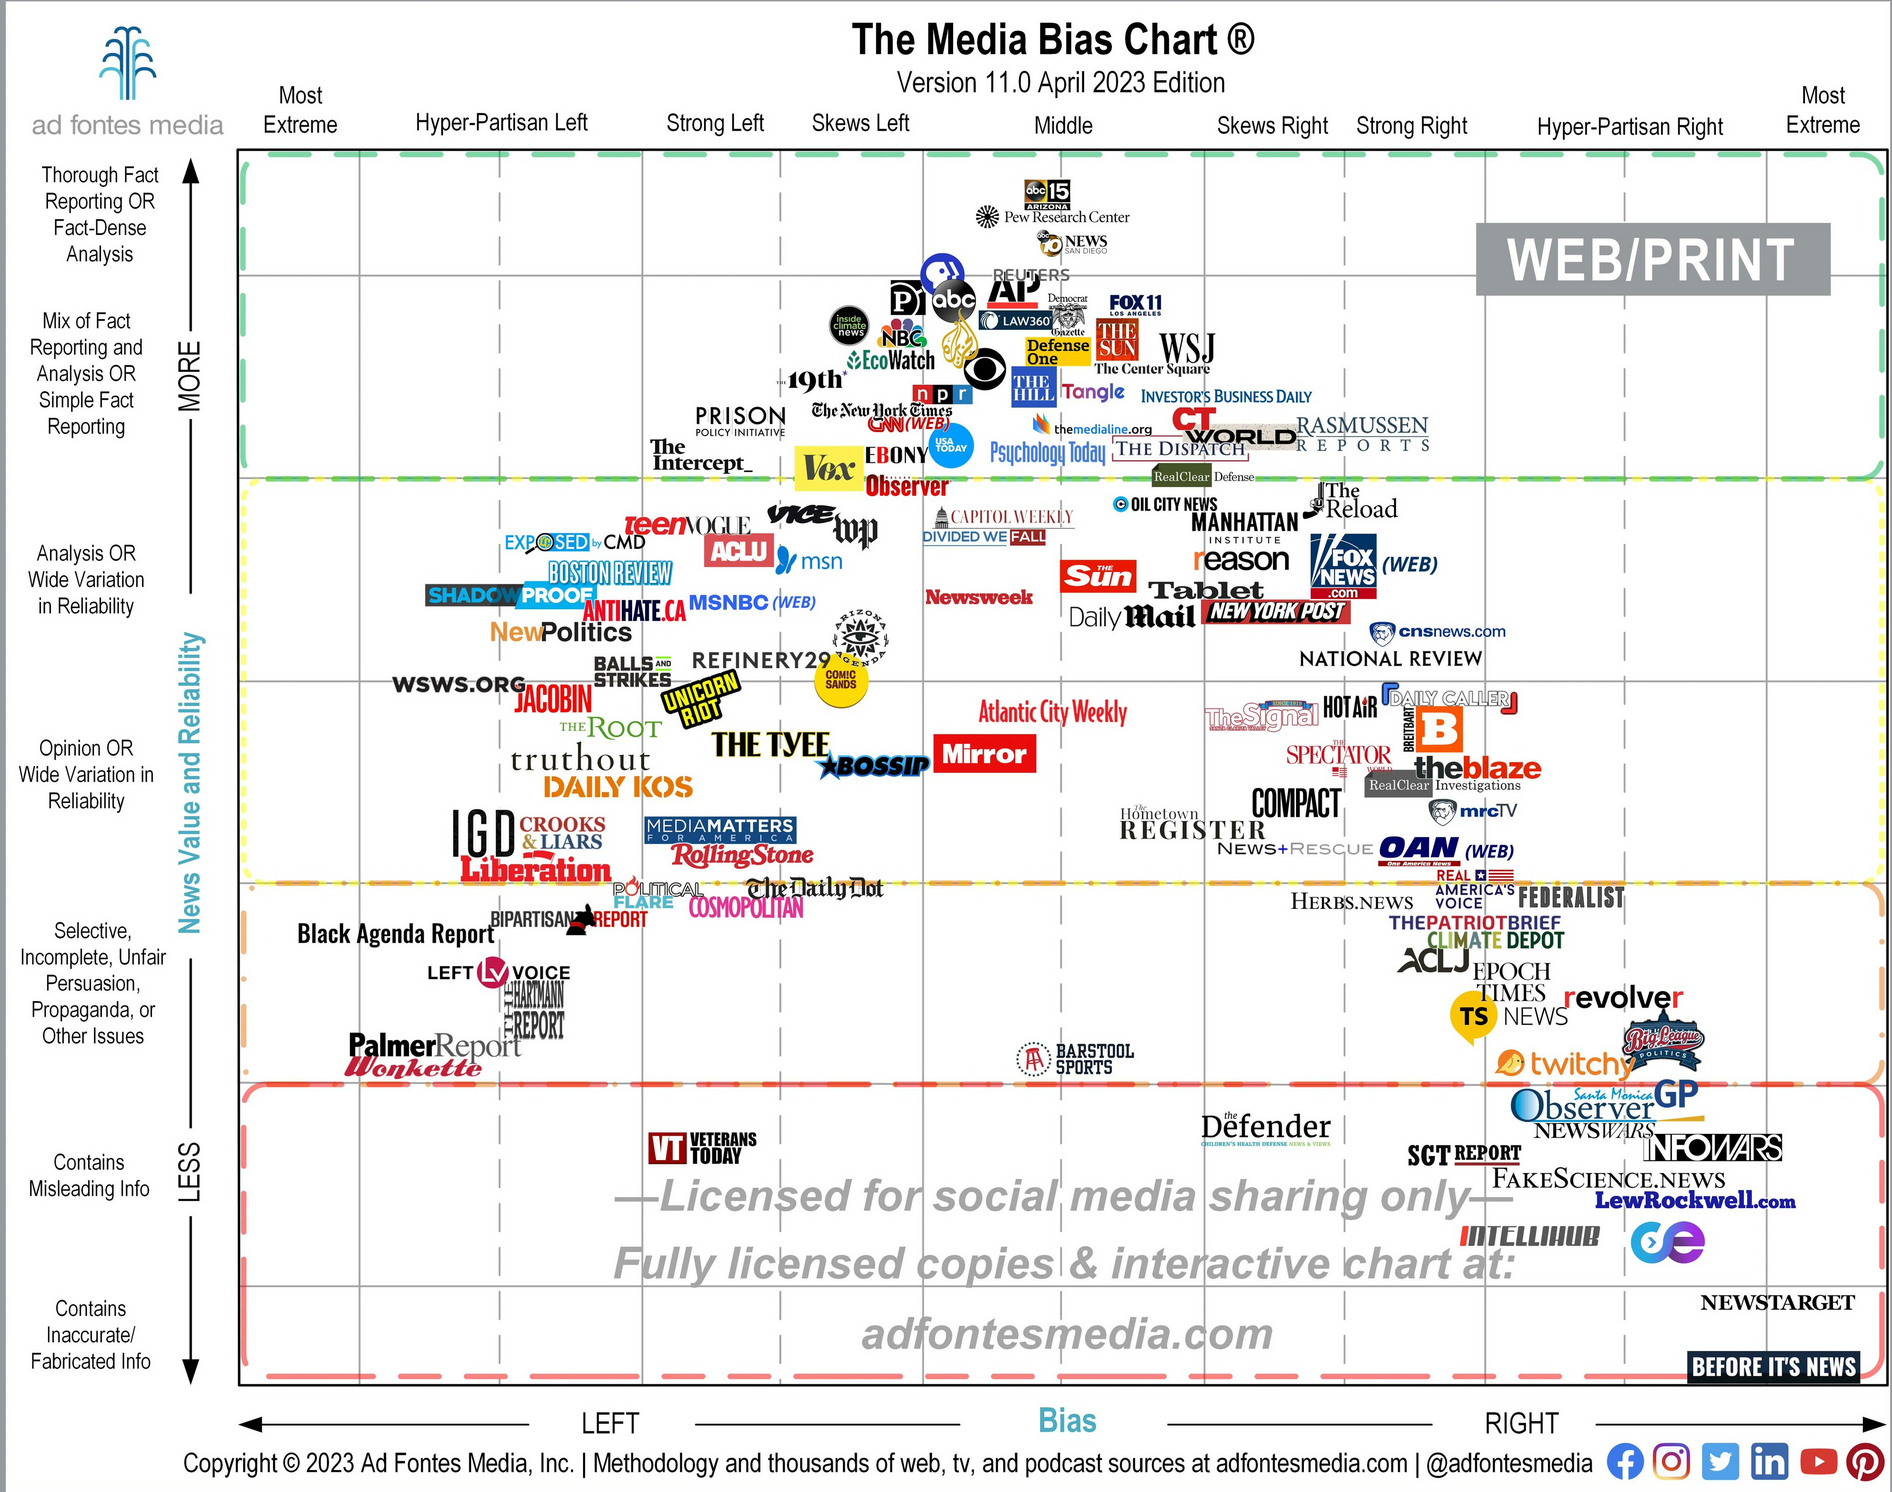 Everything wrong with the Ad Fontes Media Bias Chart